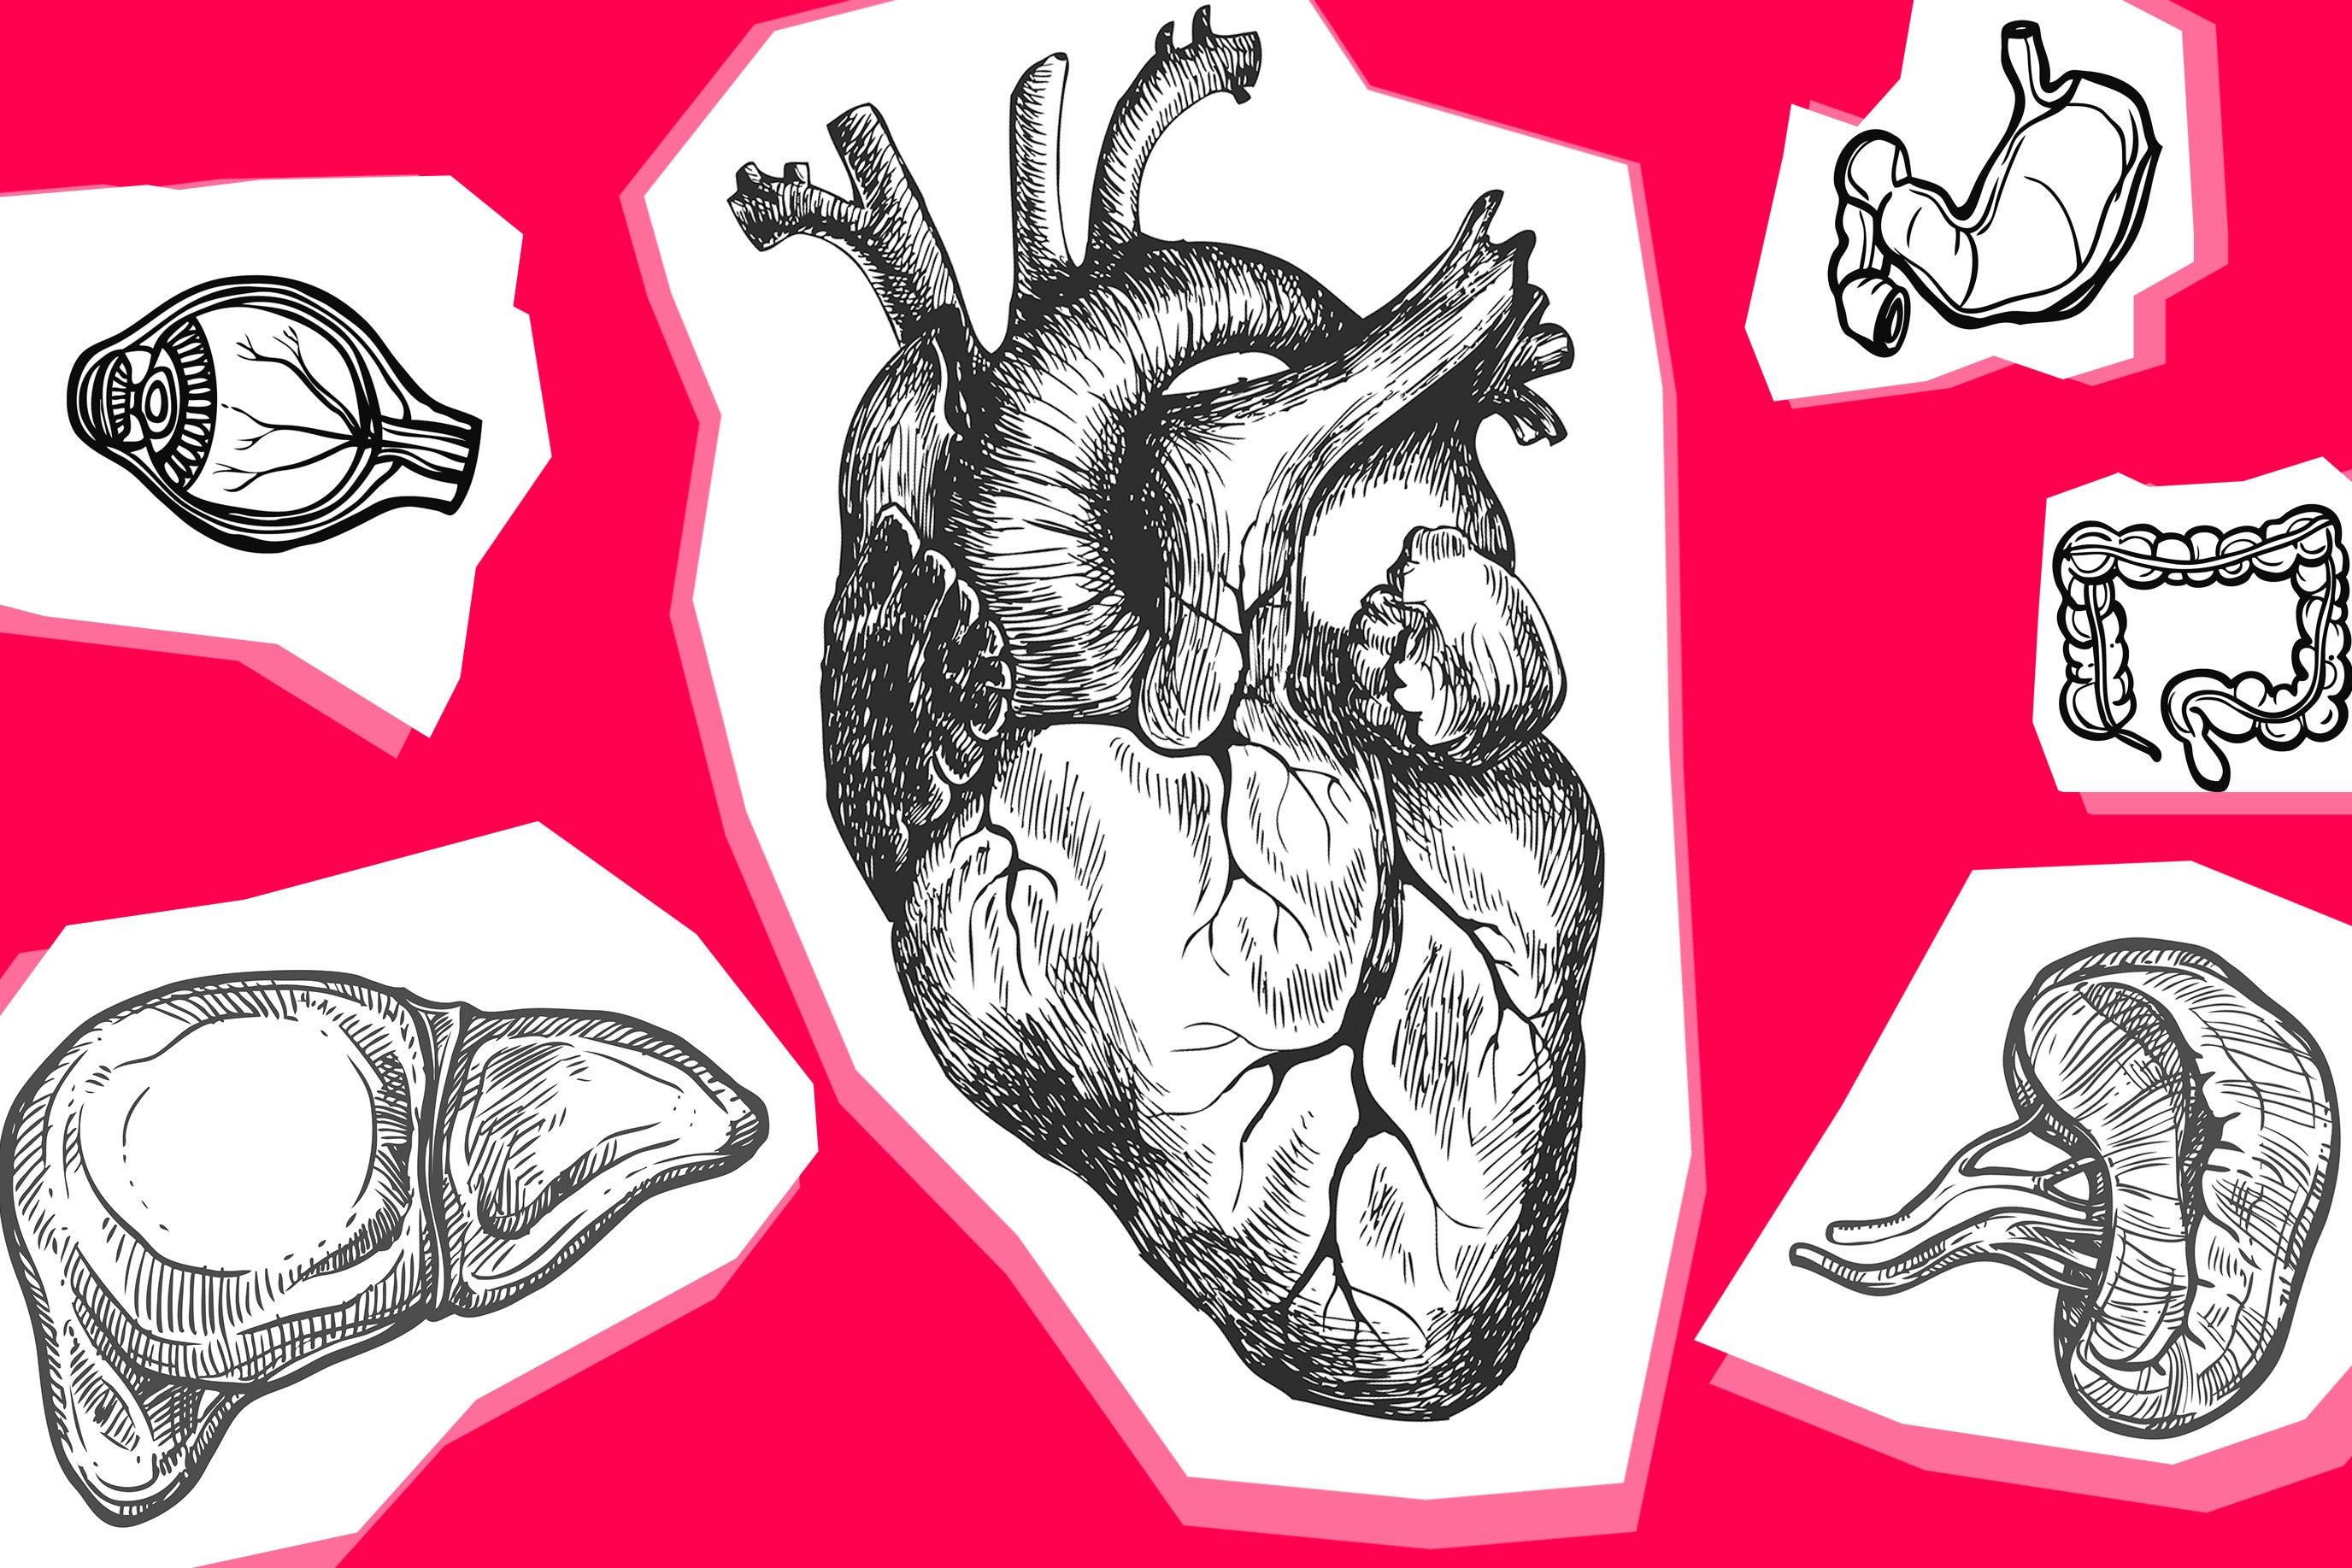 Illustrations of various organs, including a heart, eye, and stomach.